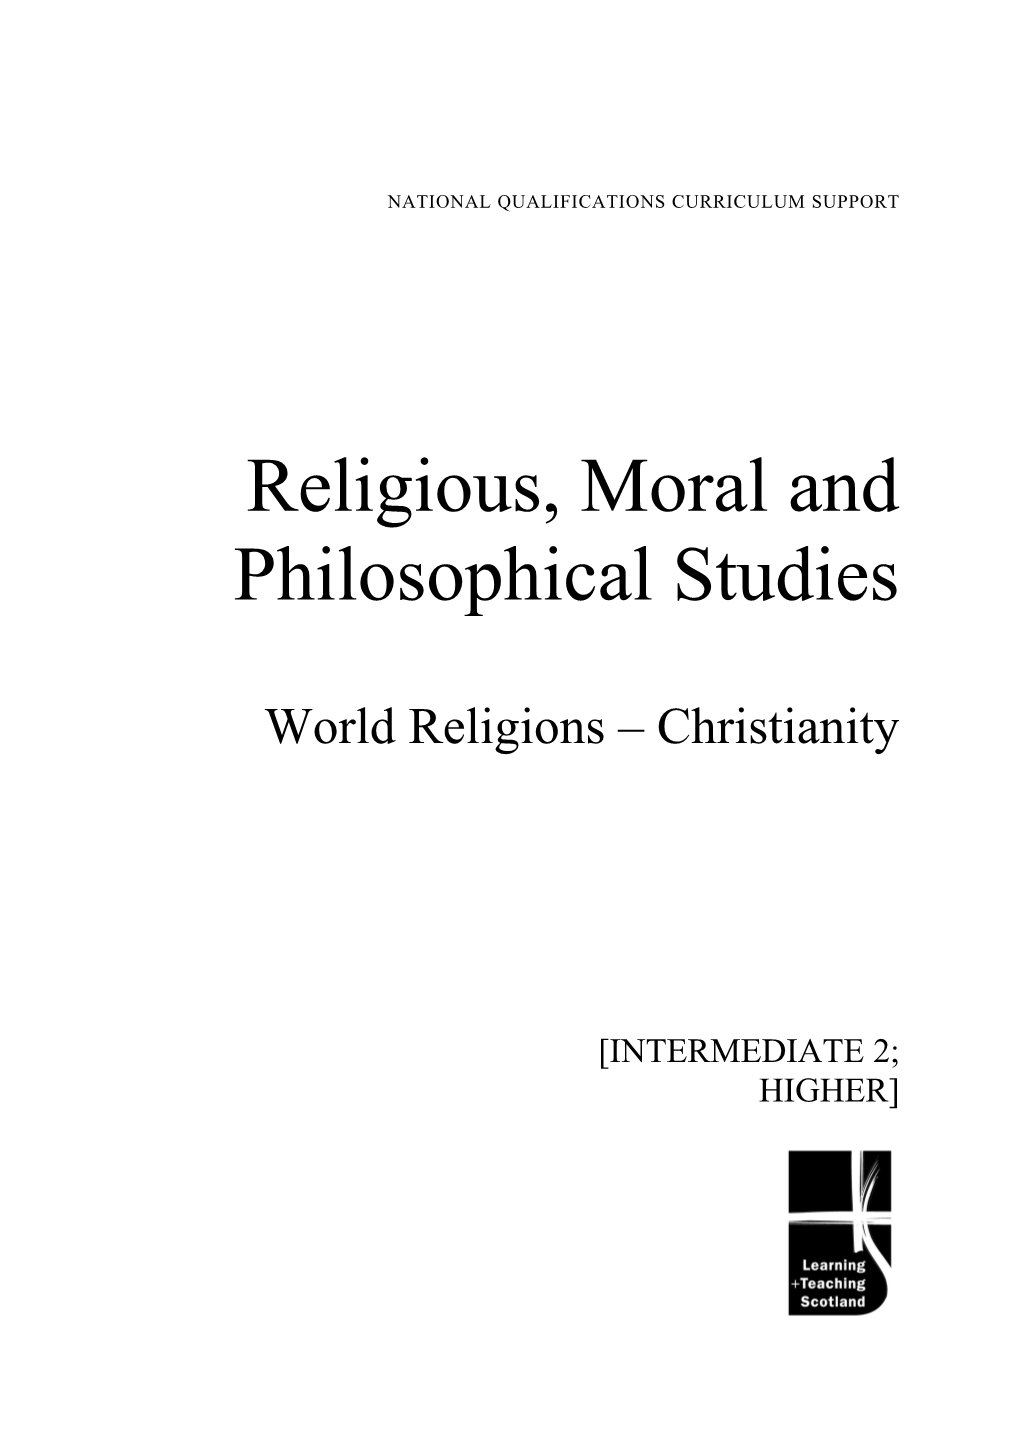 World Religions: Christianity for Intermediate 2 and Higher